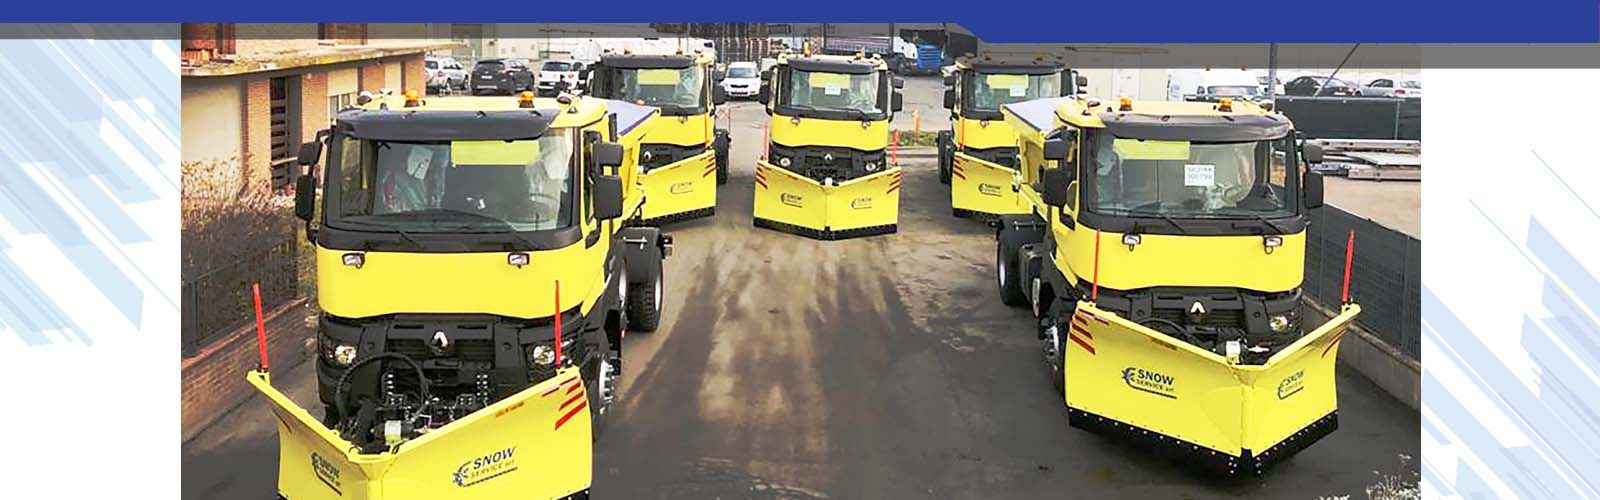 Snow service machines for ploughshare winter roads 04